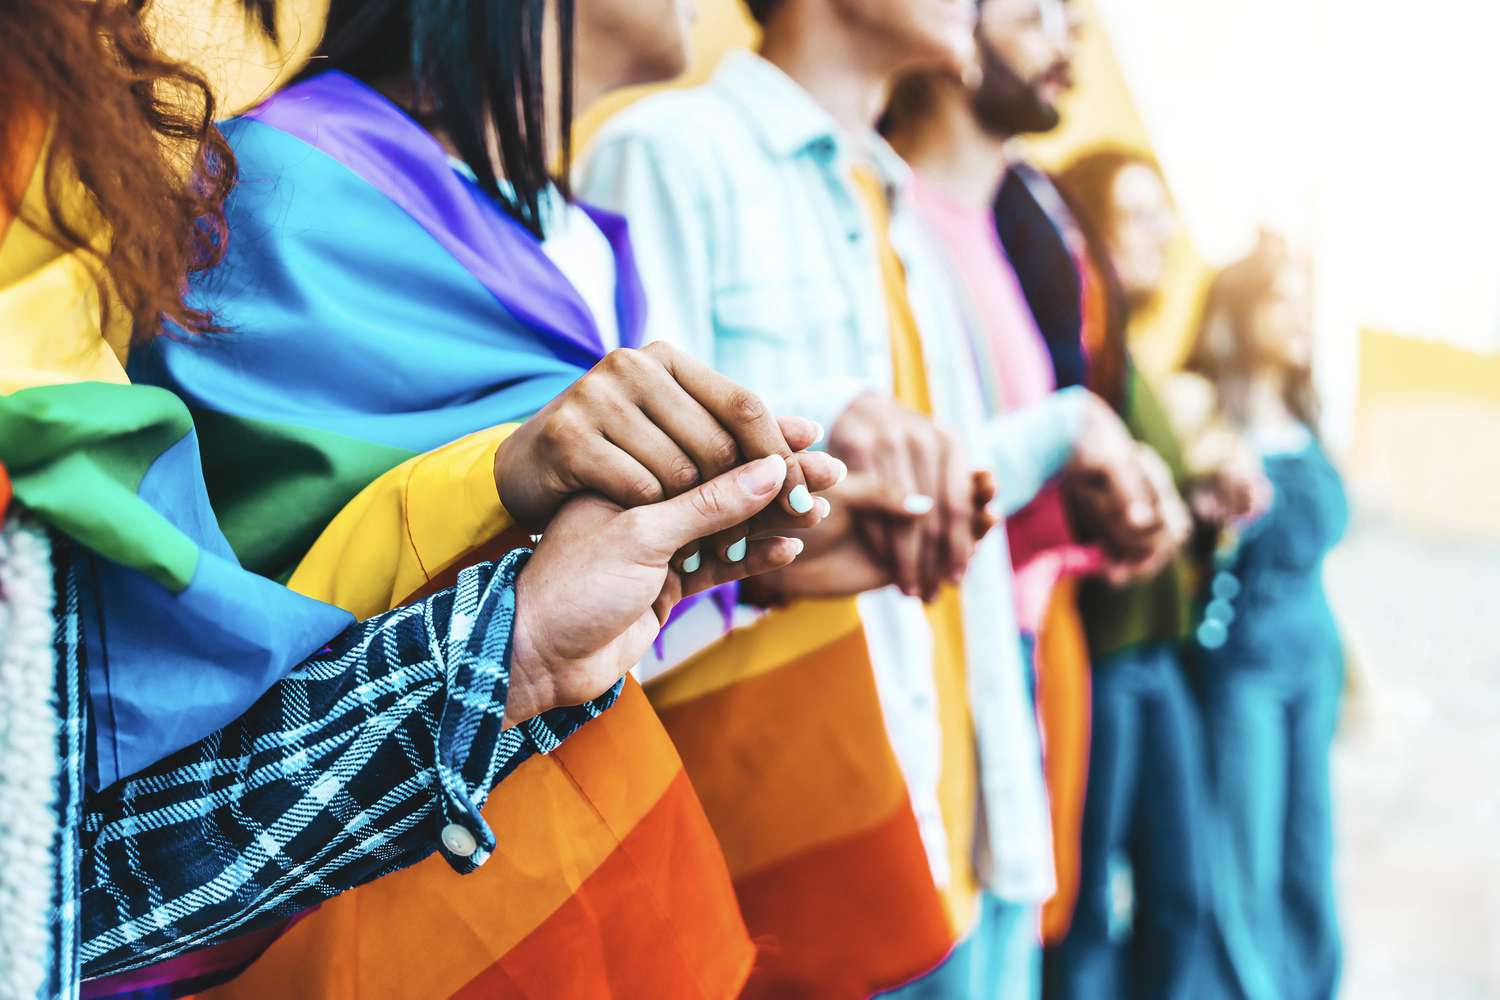 LGBTQ+ Youth Struggle With Mental Health and Are Deeply Impacted by Anti-LGBTQ+ Laws, New Survey Shows